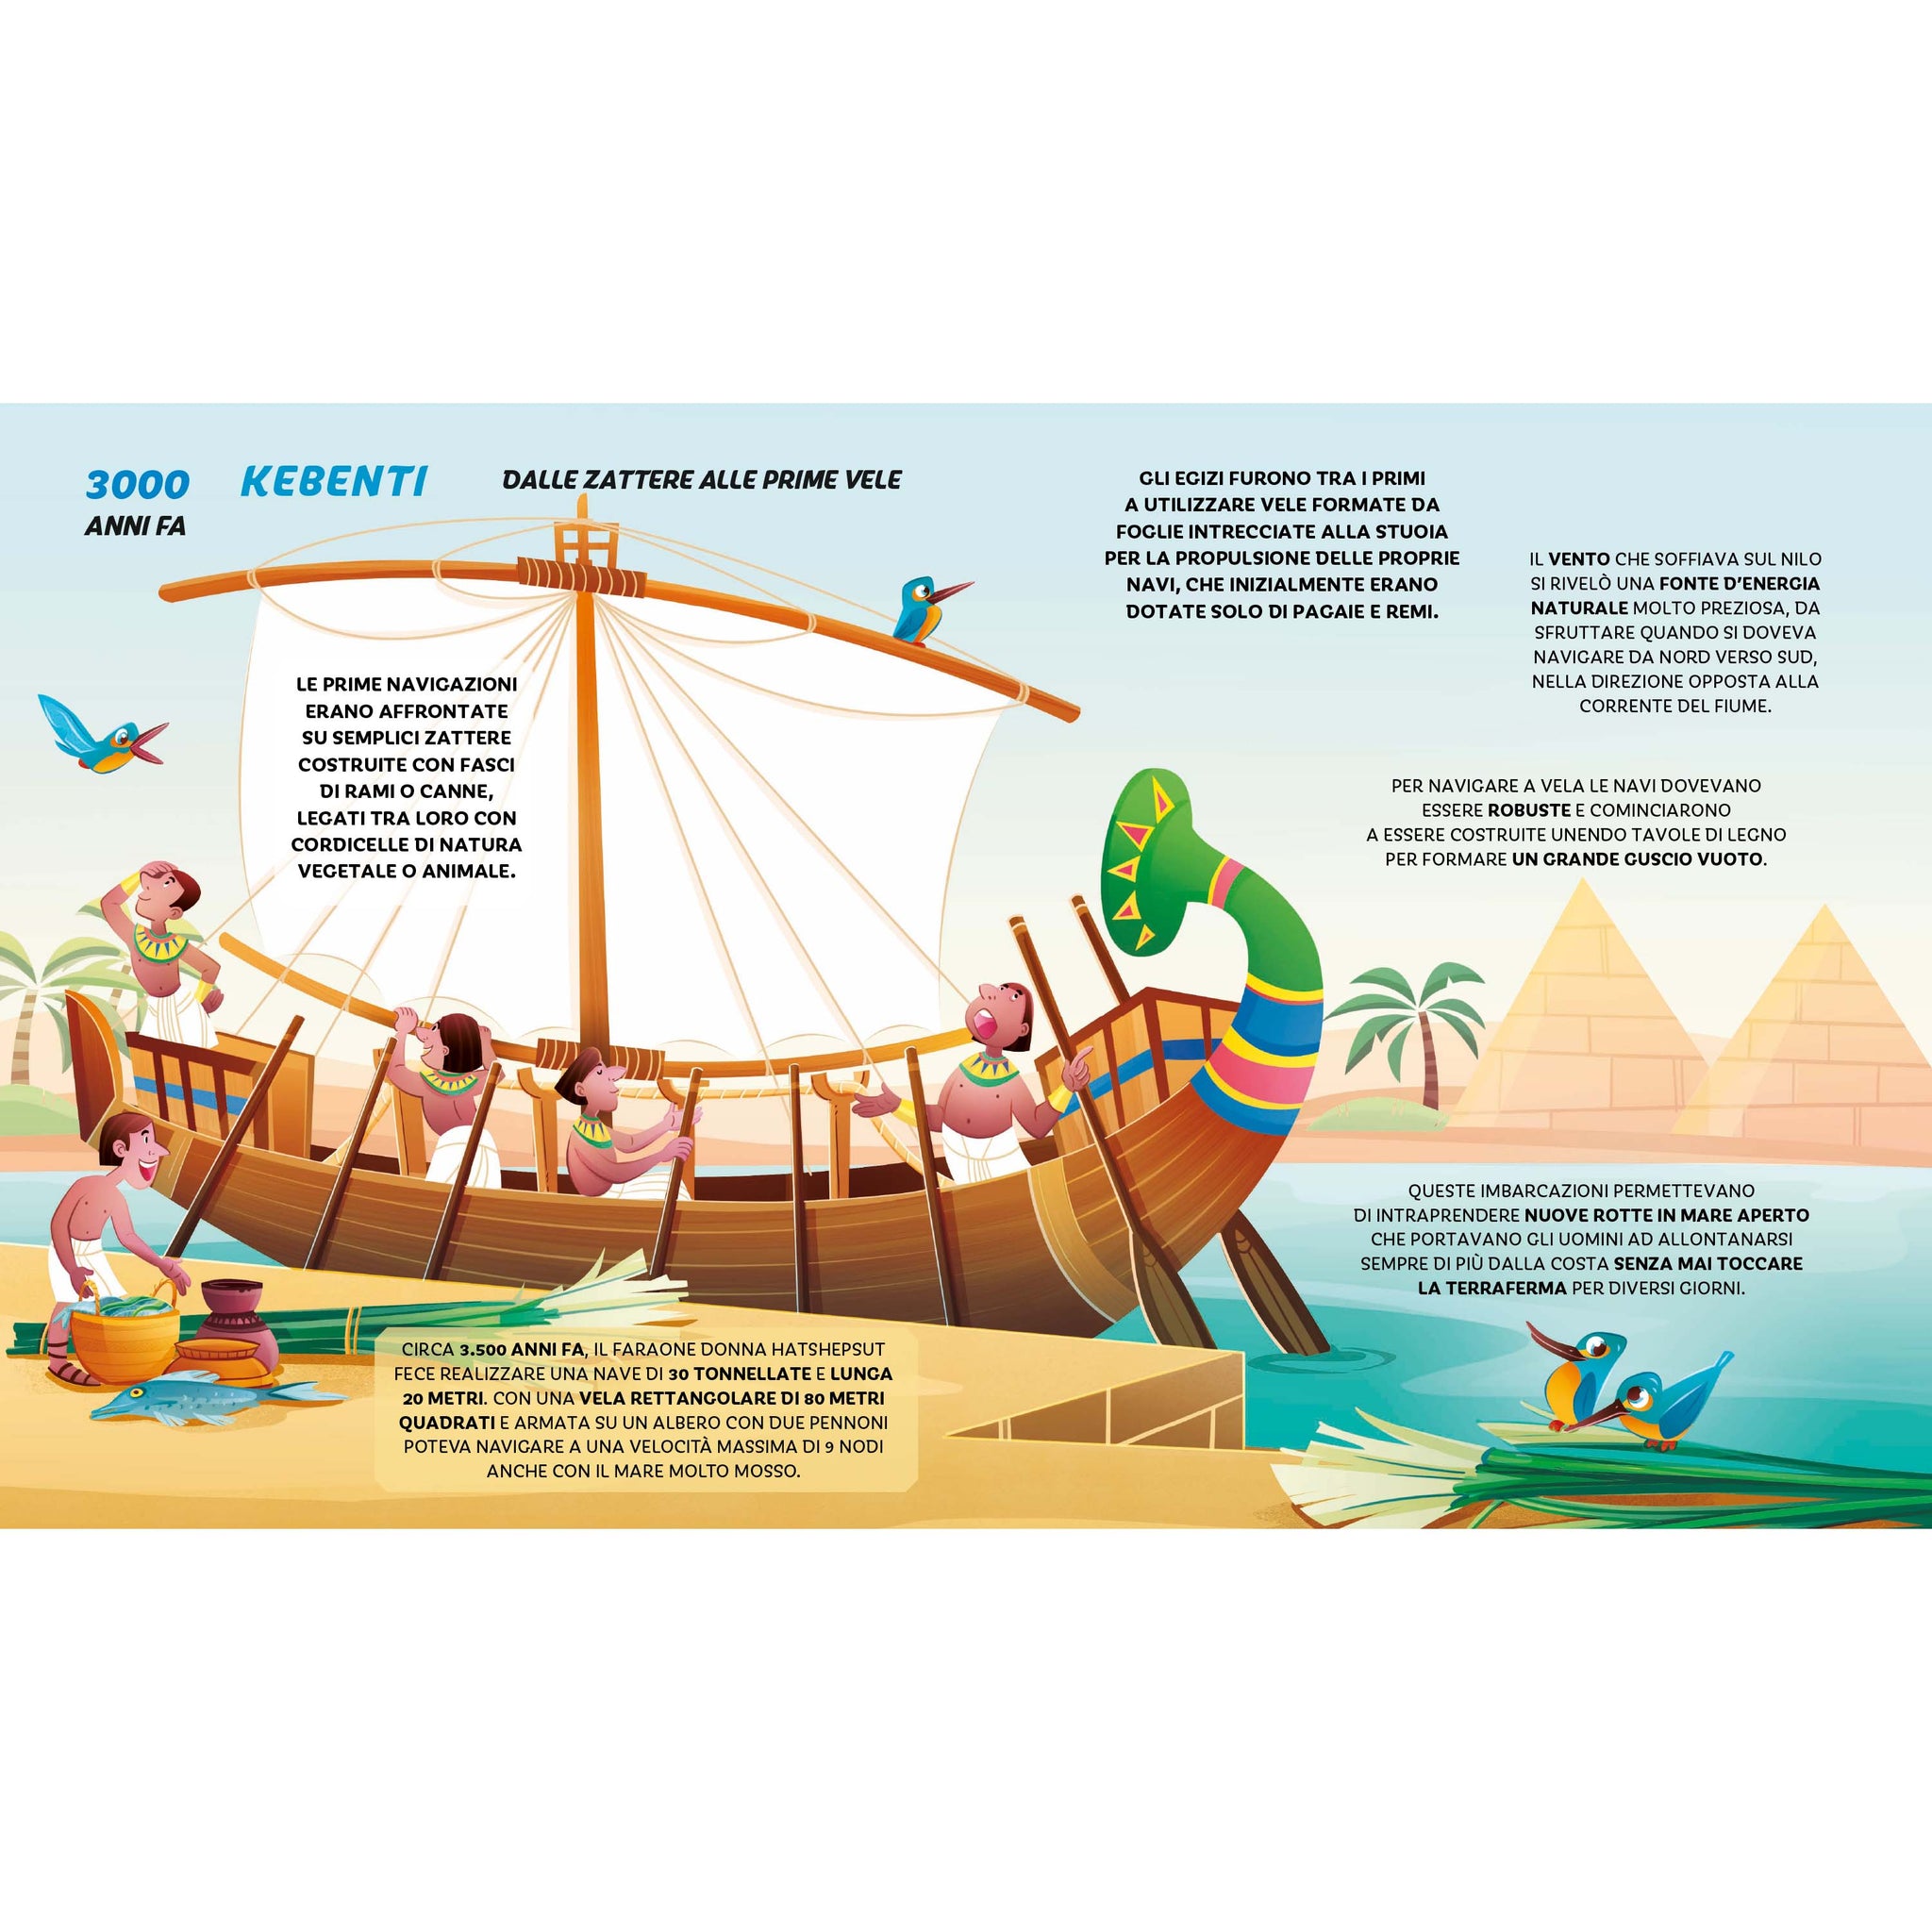 Sailboats - From the ancient Egyptians to flying boats